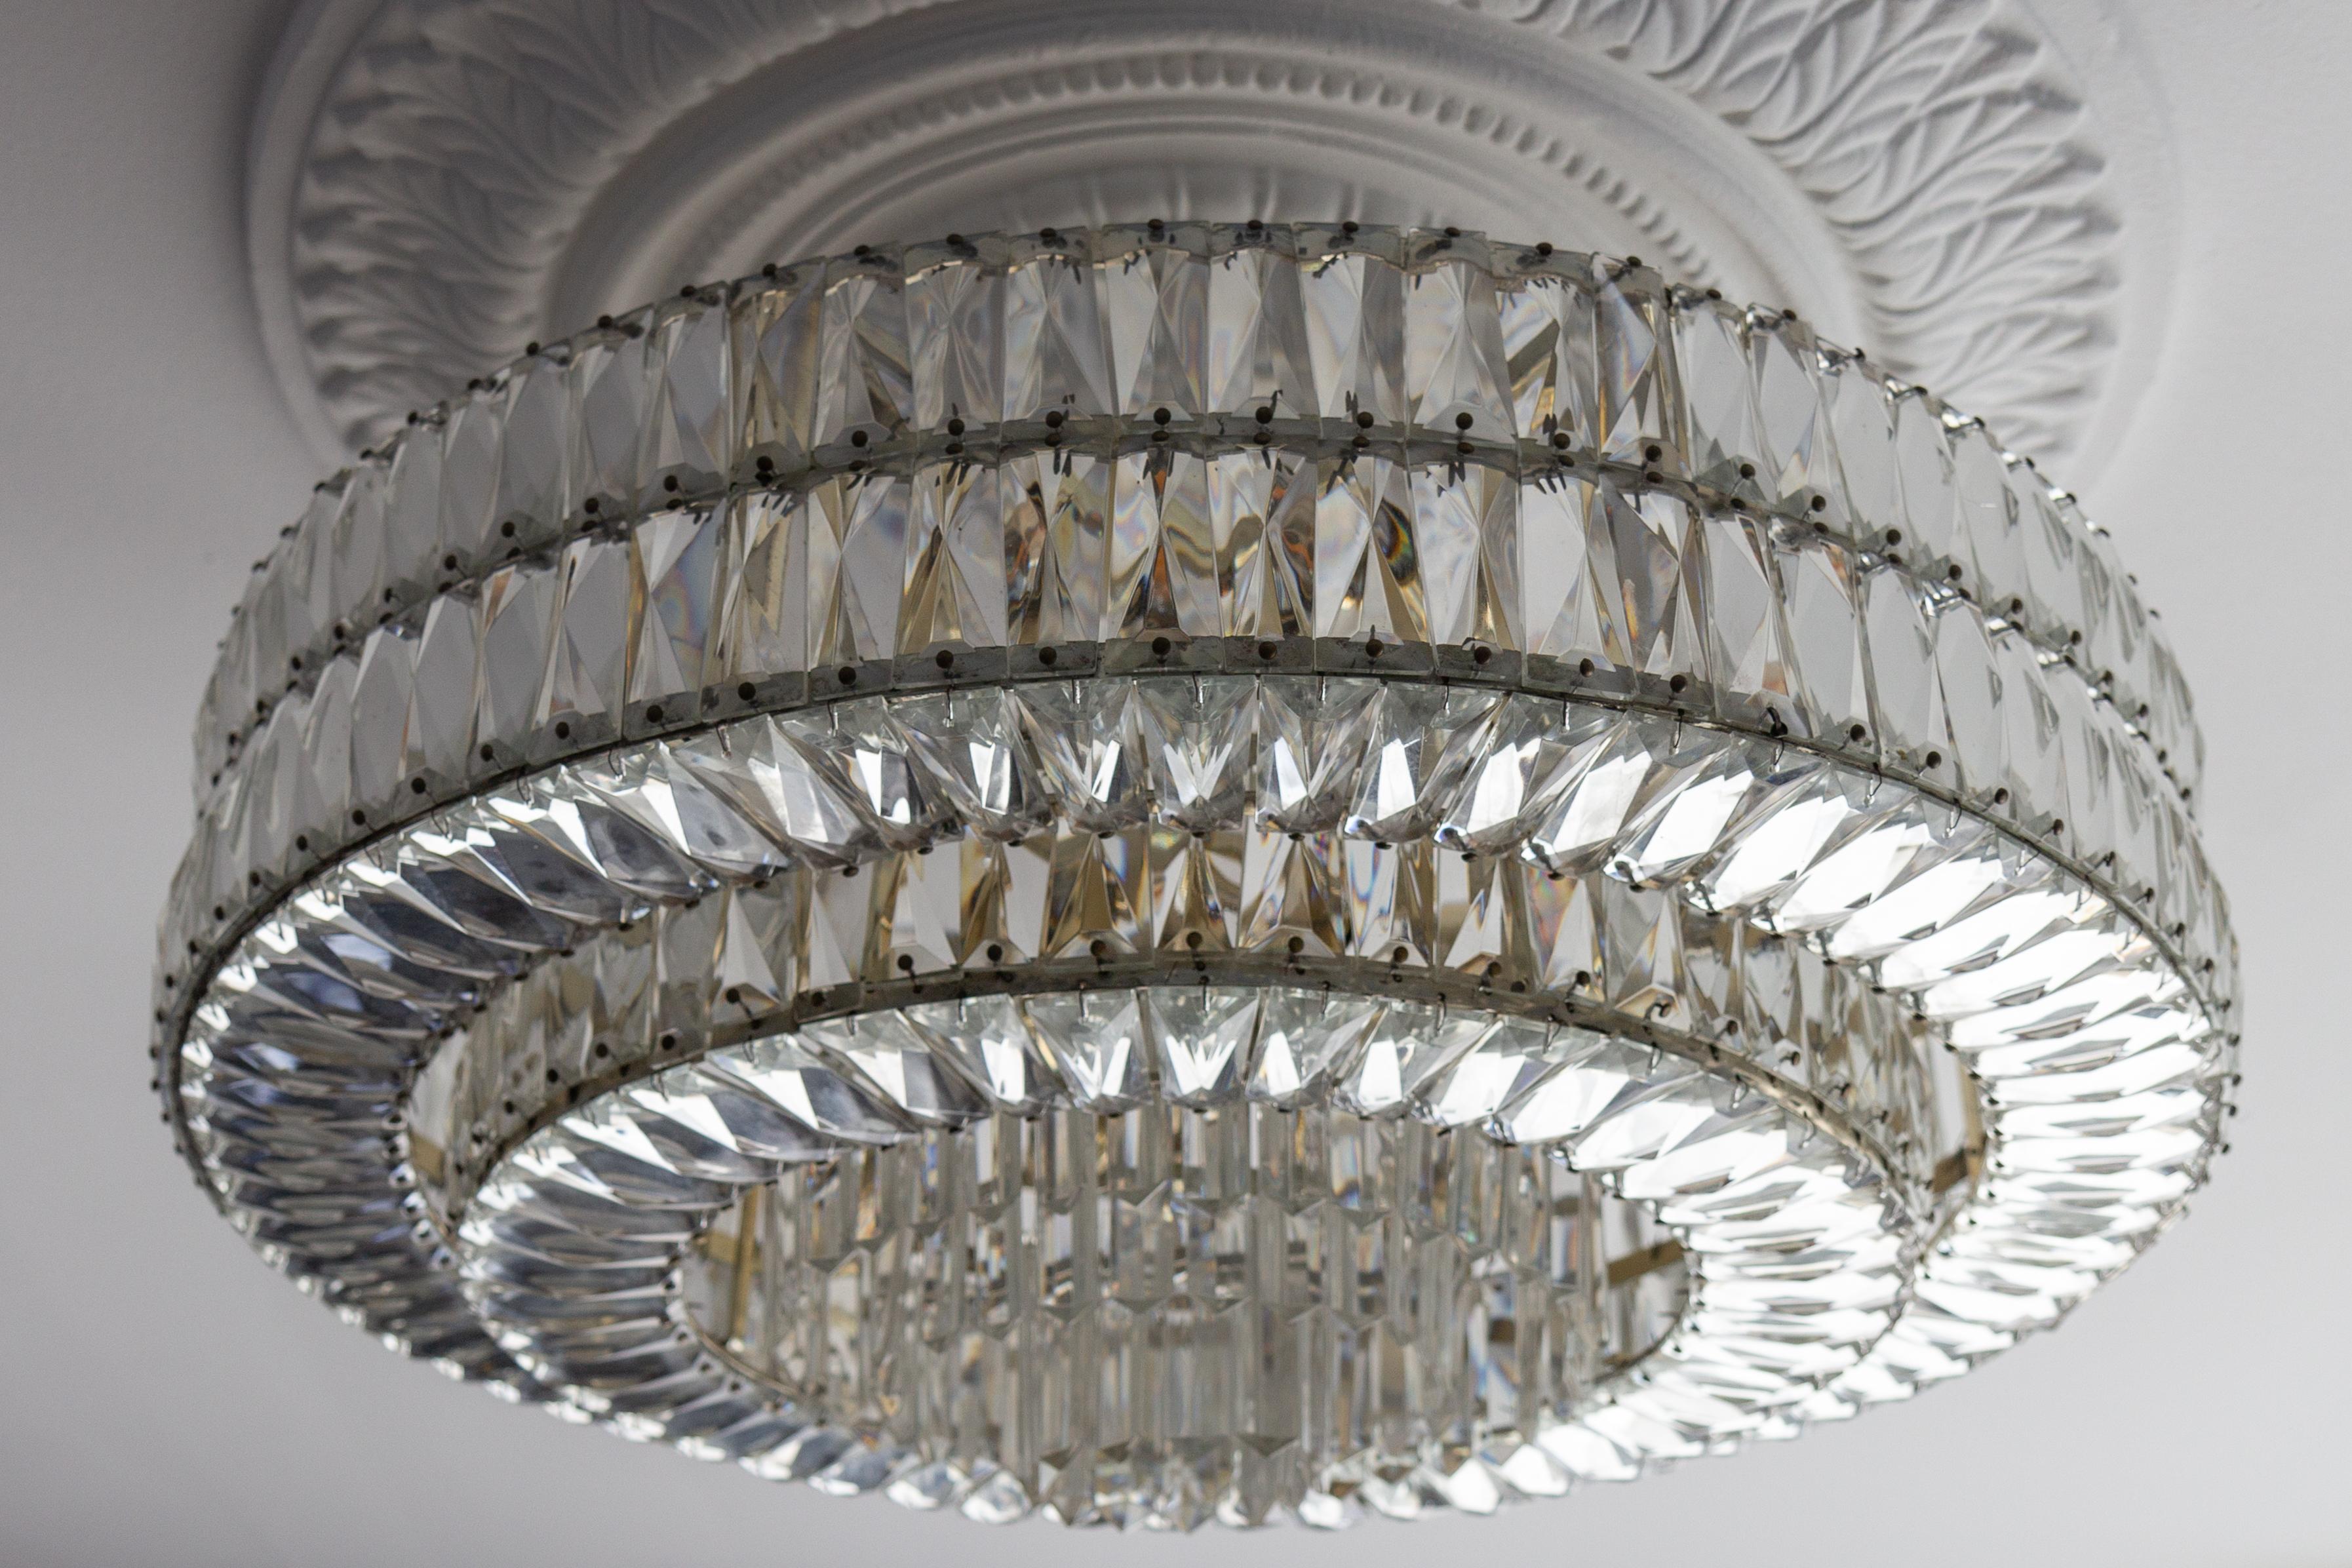 Large Mid-Century Modern crystal glass twelve-light ceiling light, Germany, circa the 1950s.
This impressive and large chandelier features a beautifully shaped crystal glass and chromed brass round body in tiers with twelve light points in two tiers